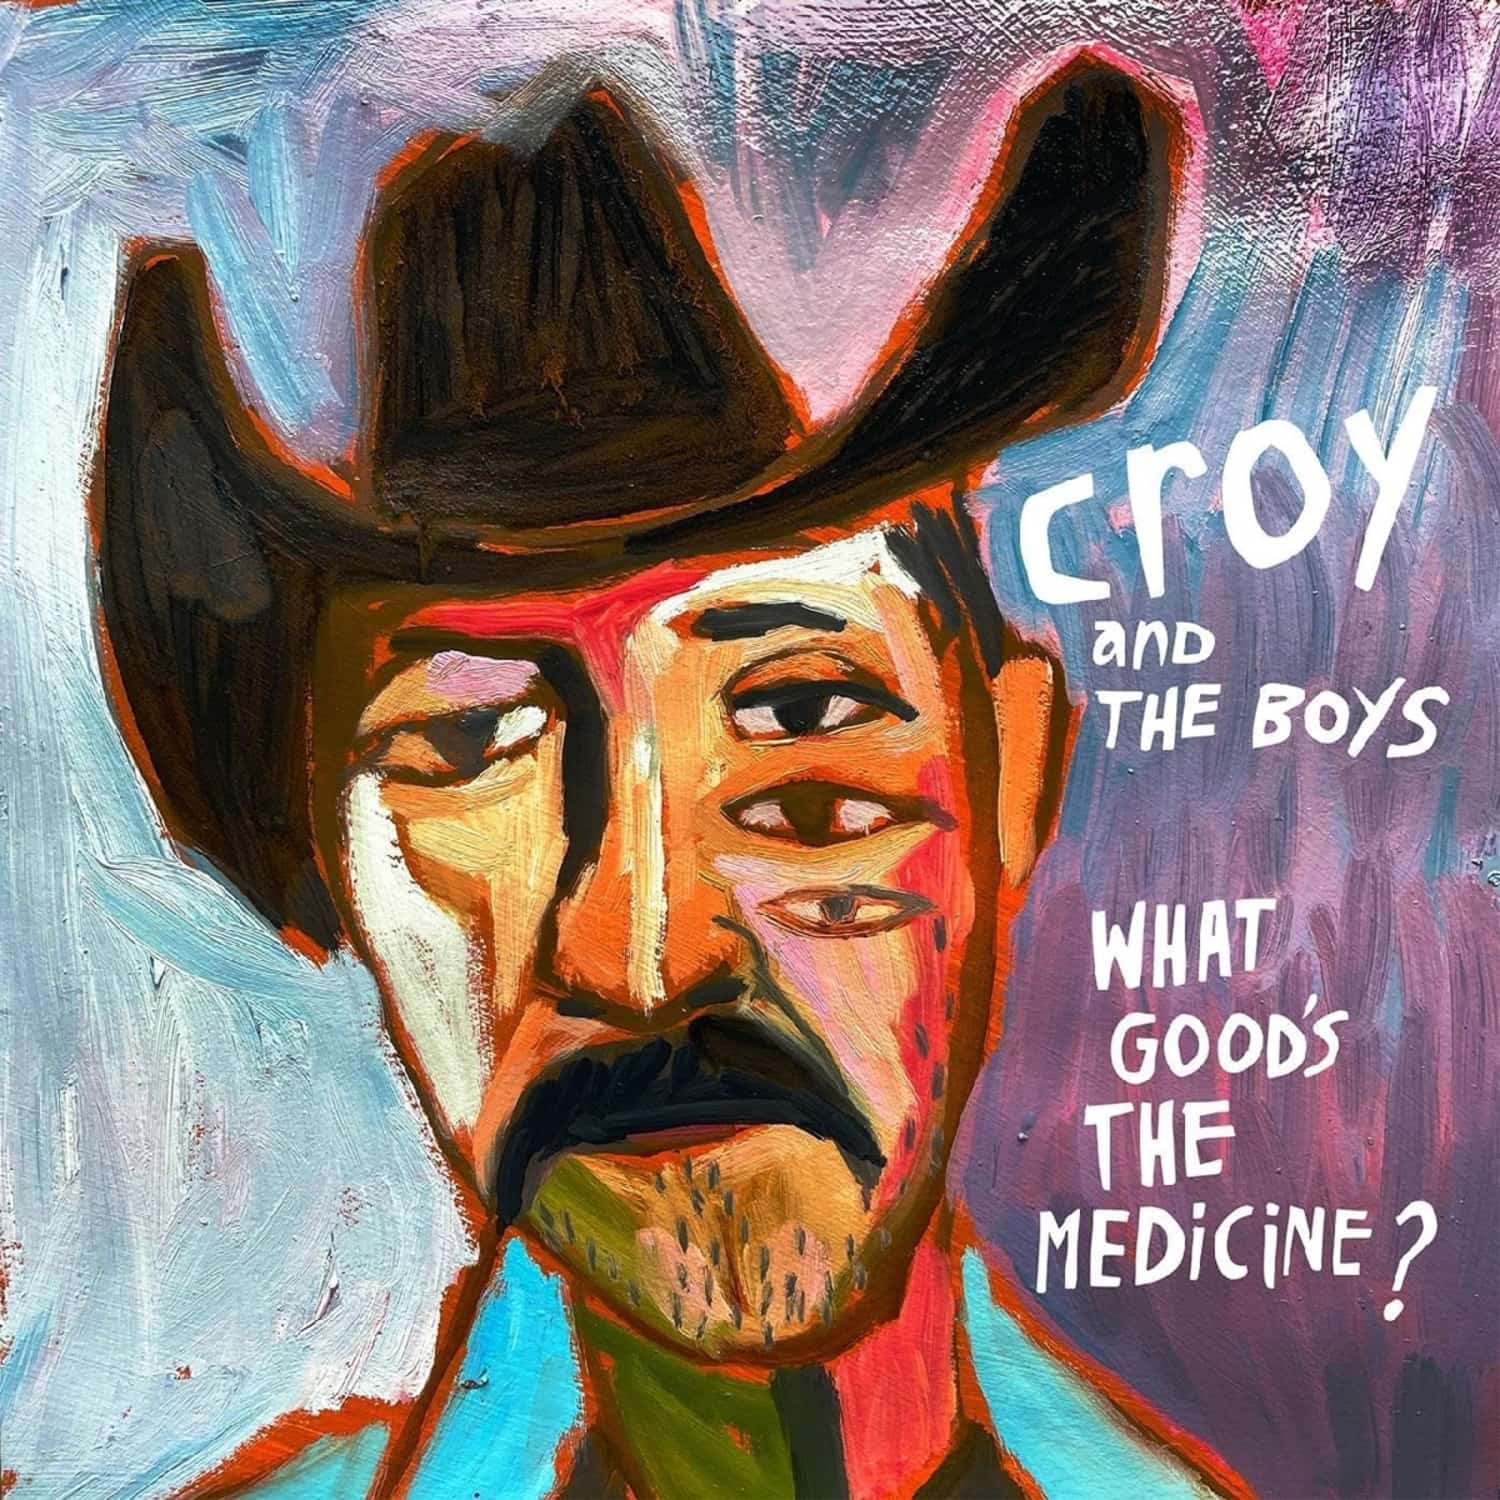 Croy & the Boys - WHAT GOOD S THE MEDICINE? 